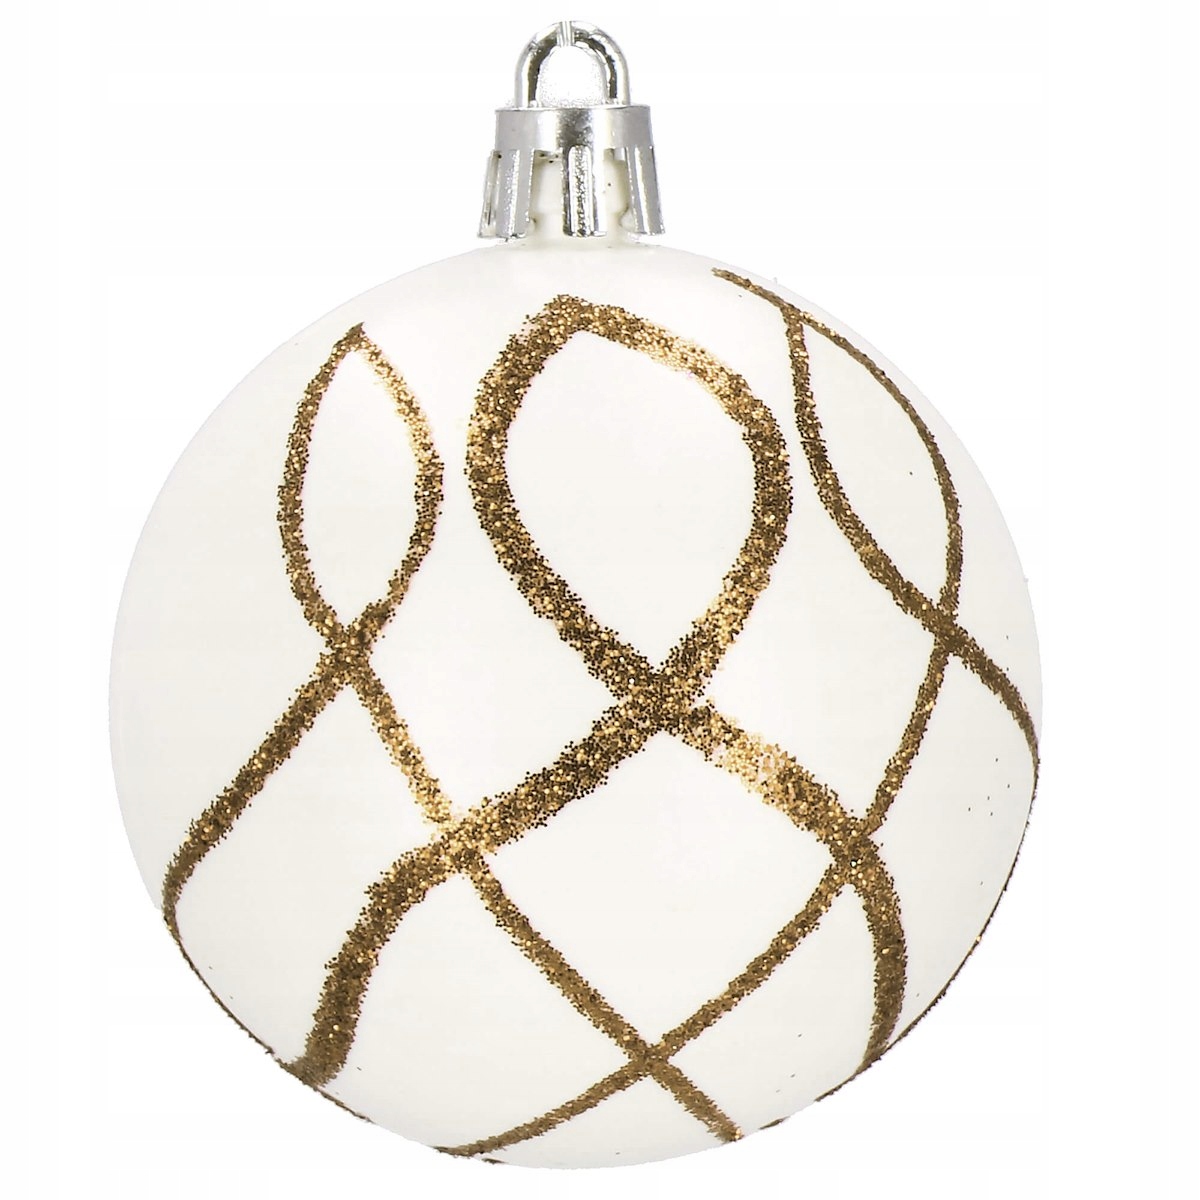 UNBREAKABLE CHRISTMAS TREE BAUBLES 20 pcs SET 6CM FOR CHRISTMAS TREE PREMIUM PATTERNS Color: shades of yellow and gold